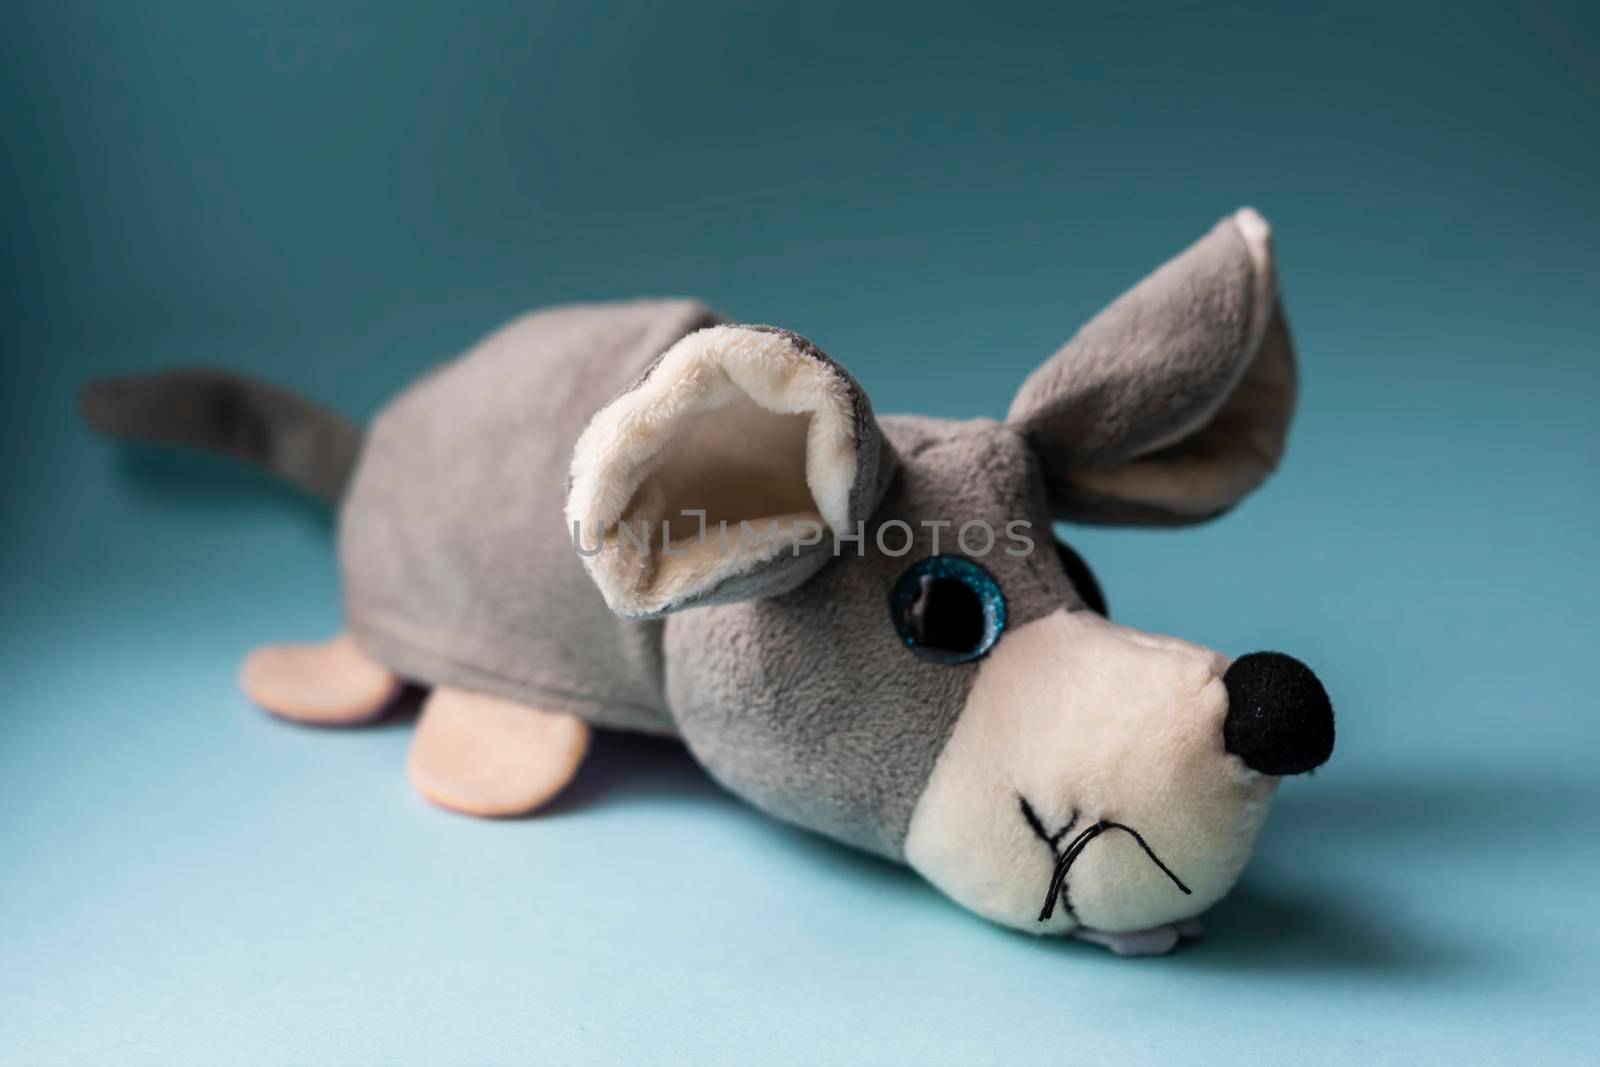 Plush toy gray dog on a blue background. Indoors, day light Front view. by Essffes